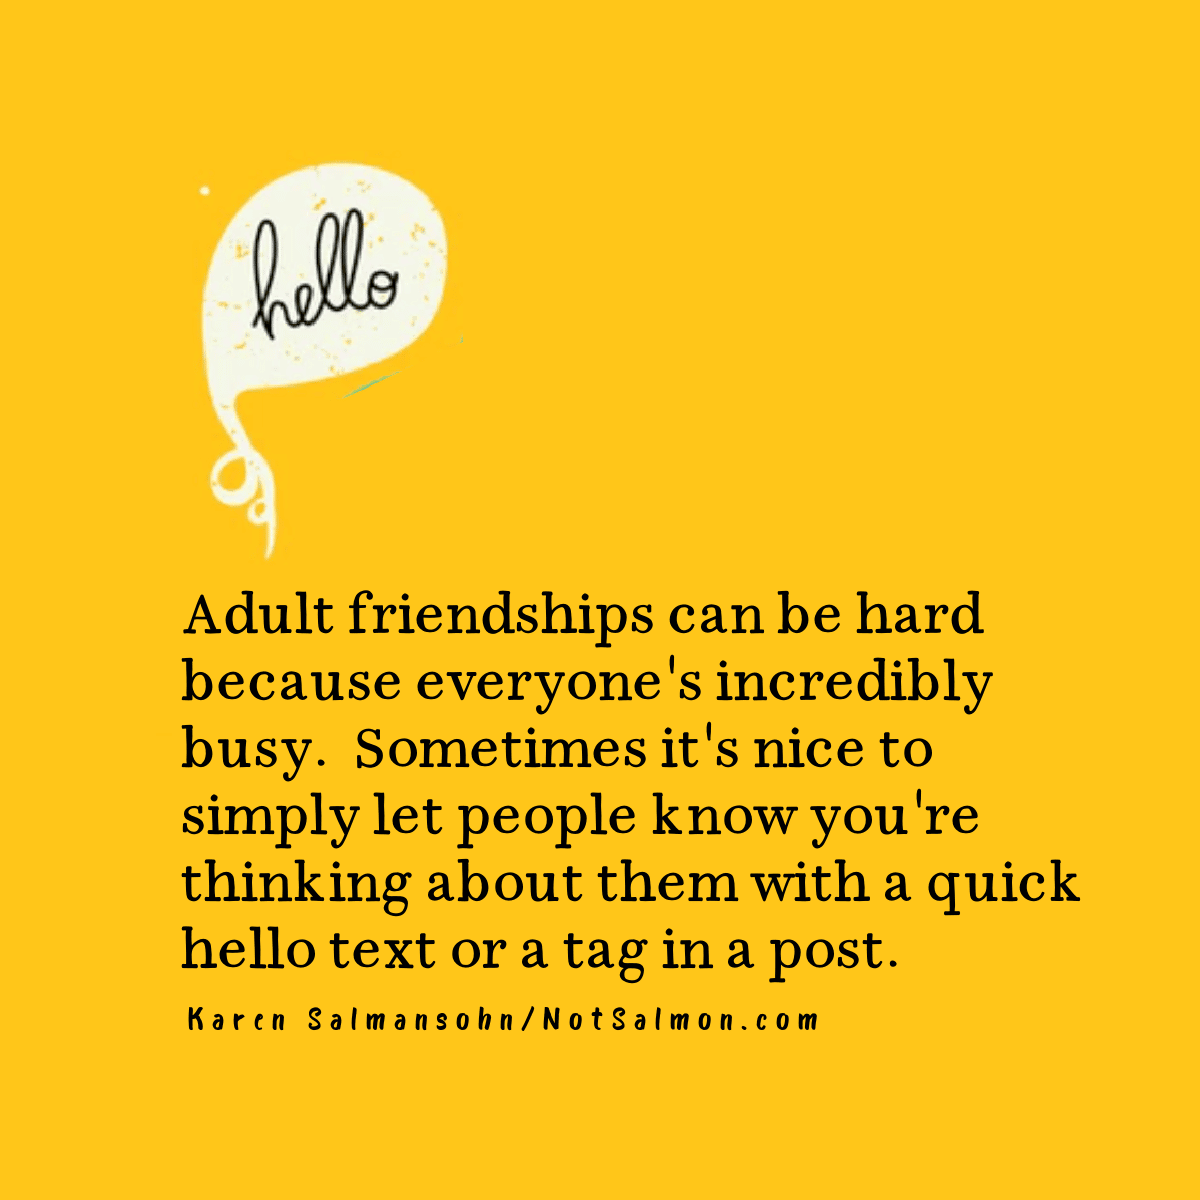 adult friendship quote to help friends feel appreciated